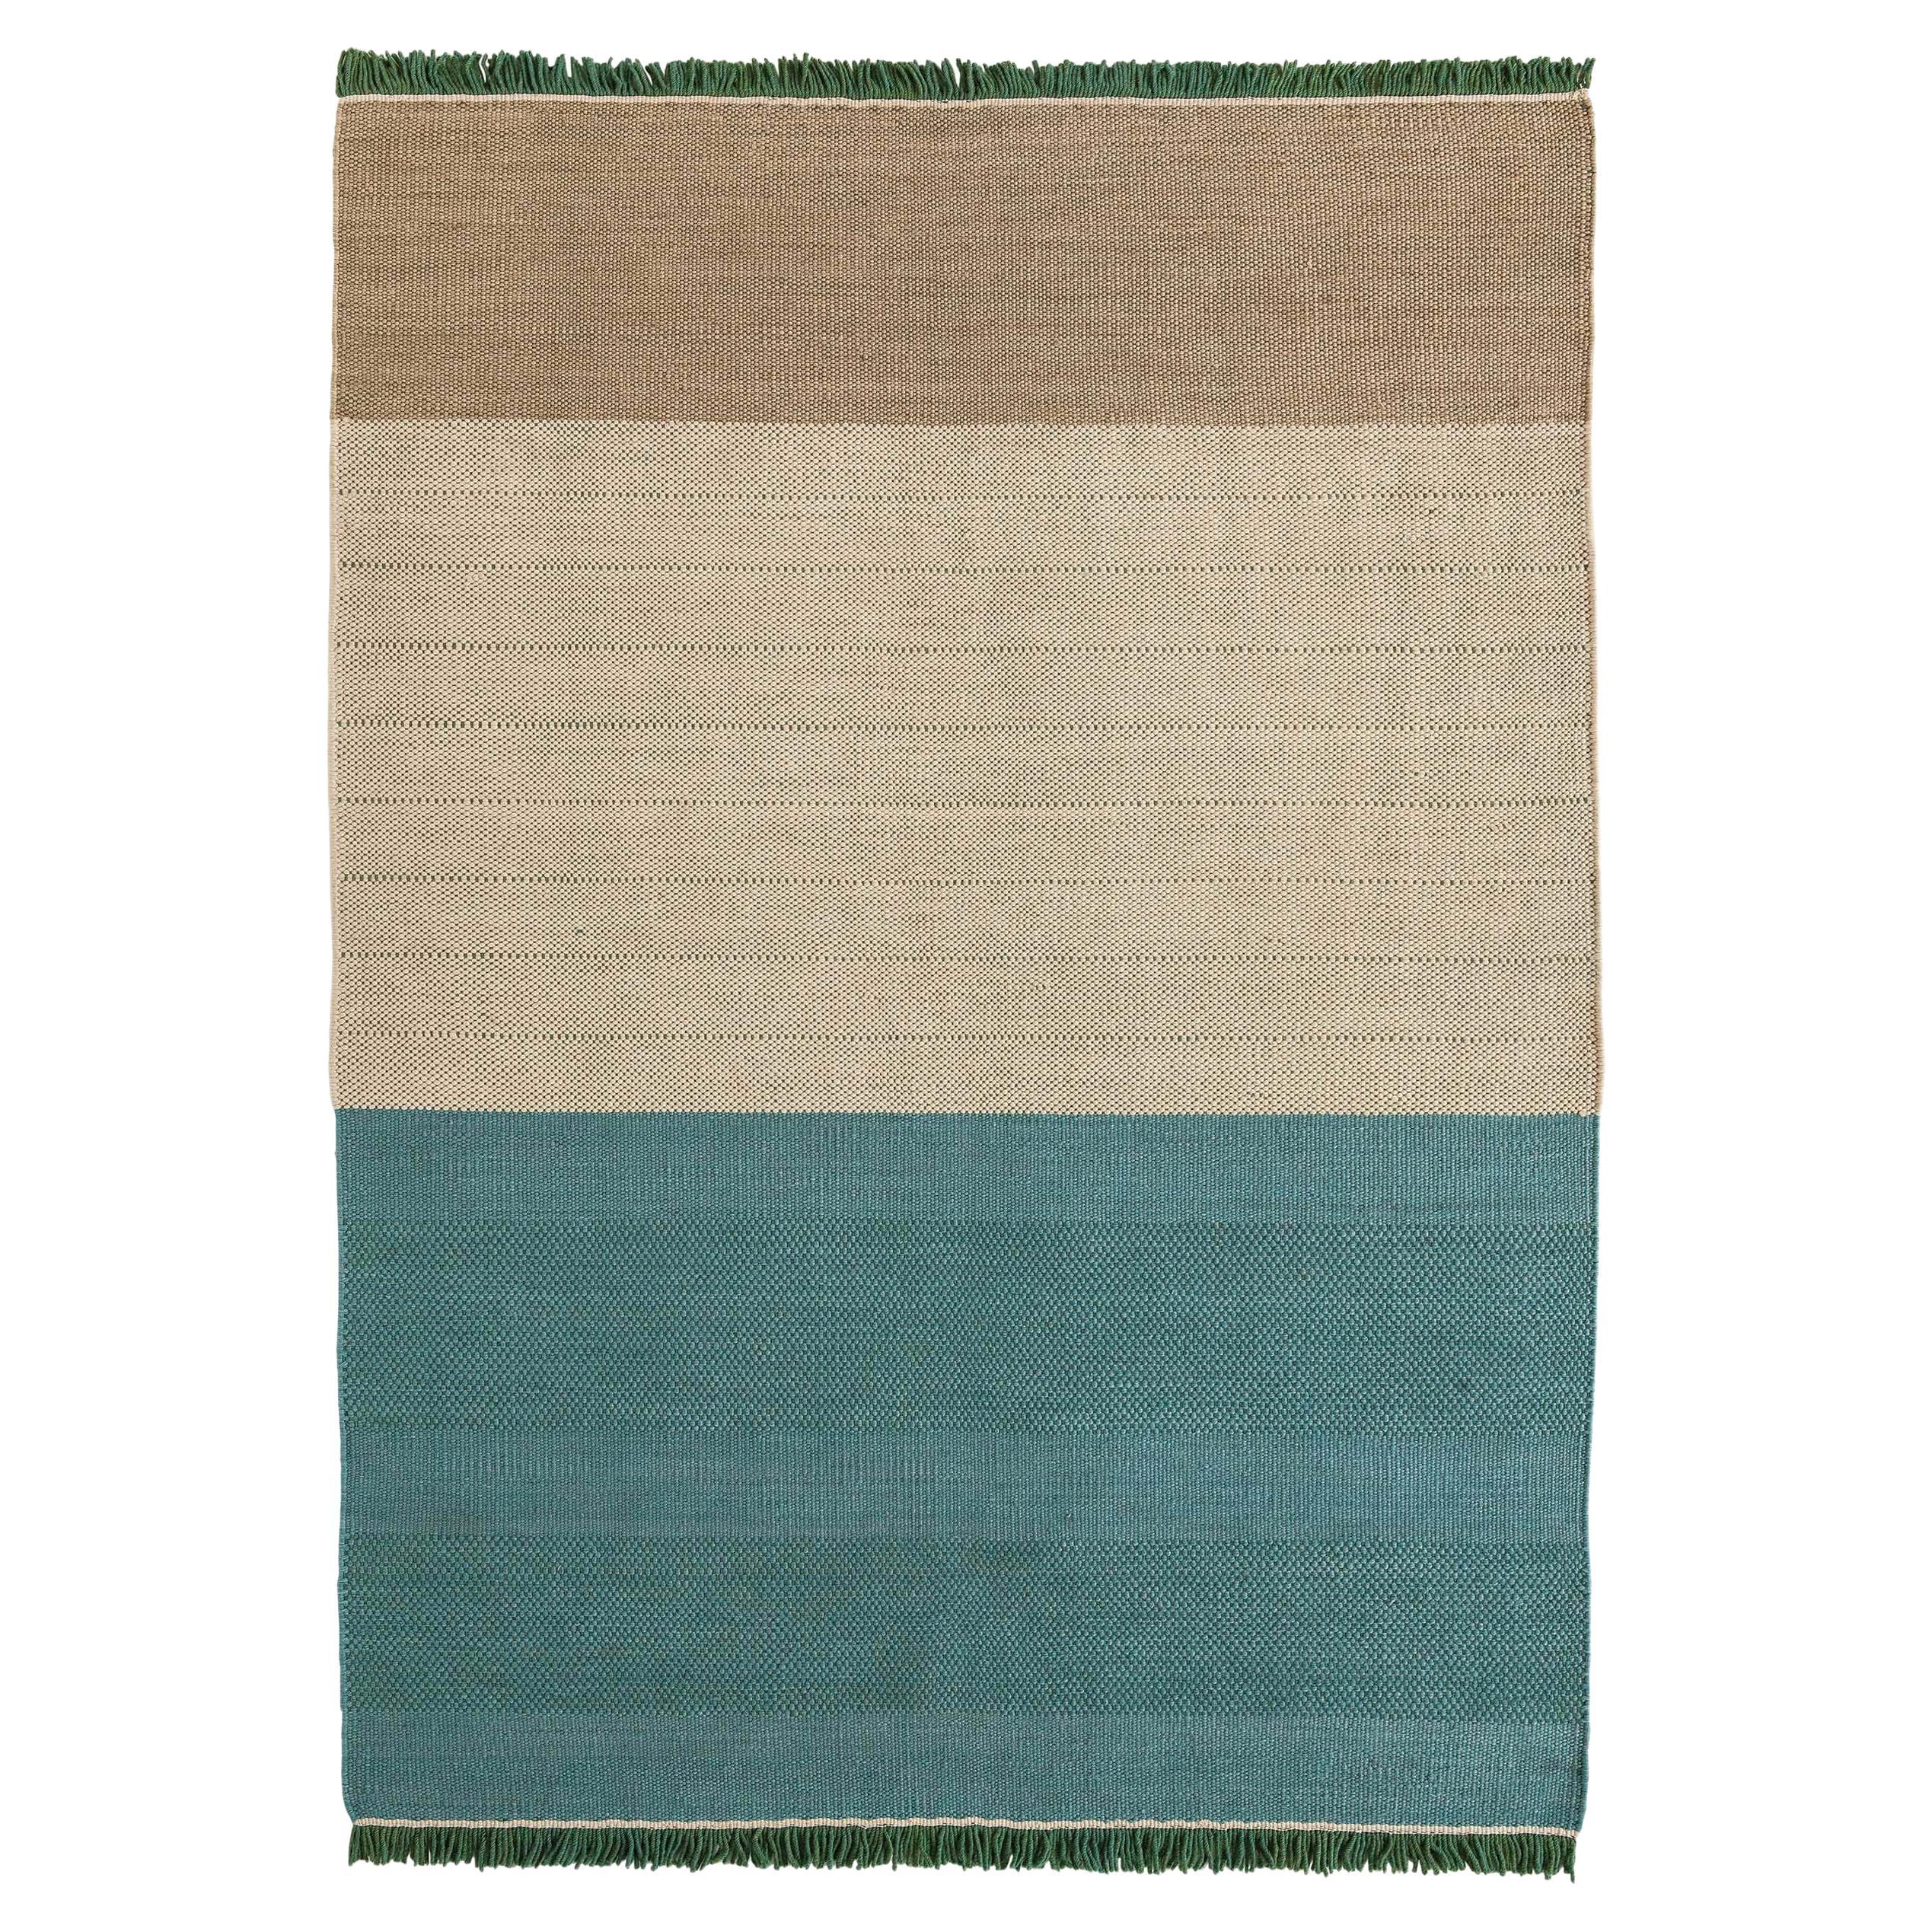 Hand-Loomed Tres Stripes Rug in Green by Nani Marquina & Elisa Padro, Large